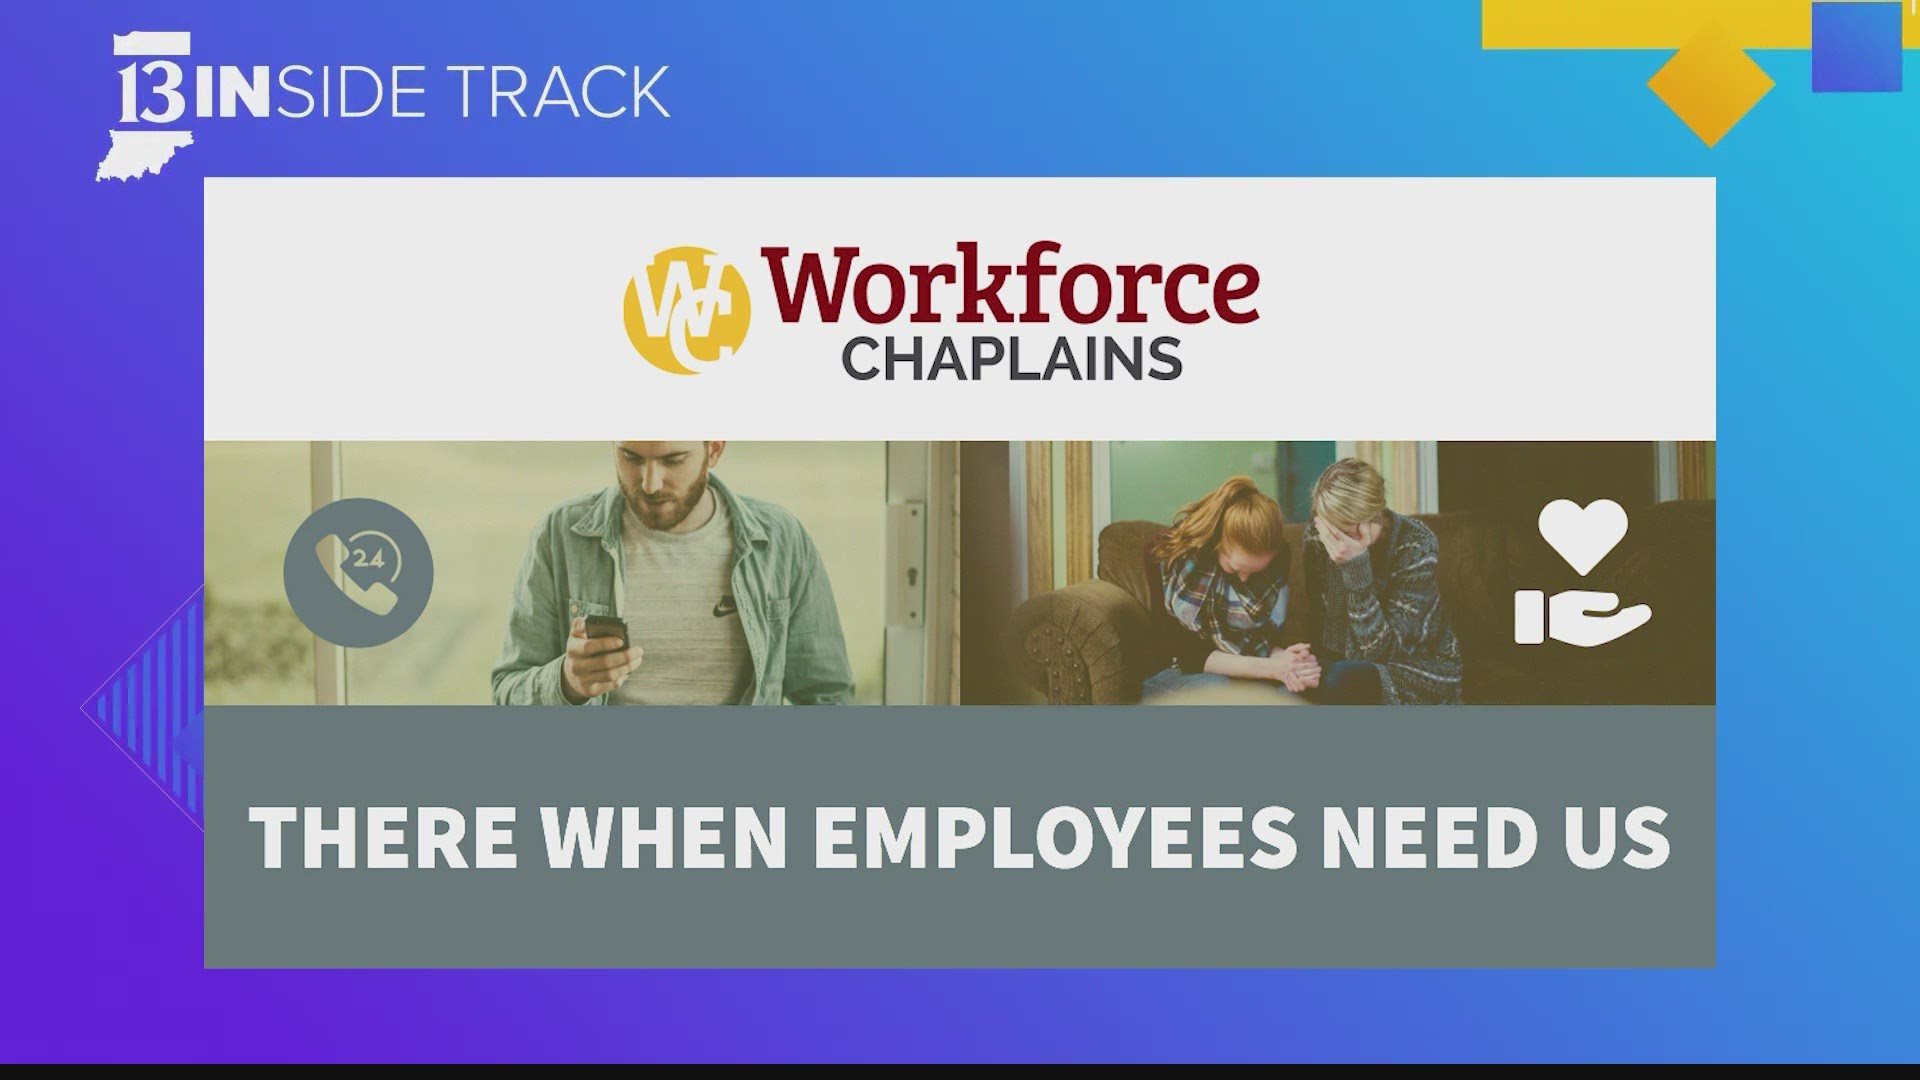 The power of prayer and spiritual support are two of the benefits of the workforce chaplain program.